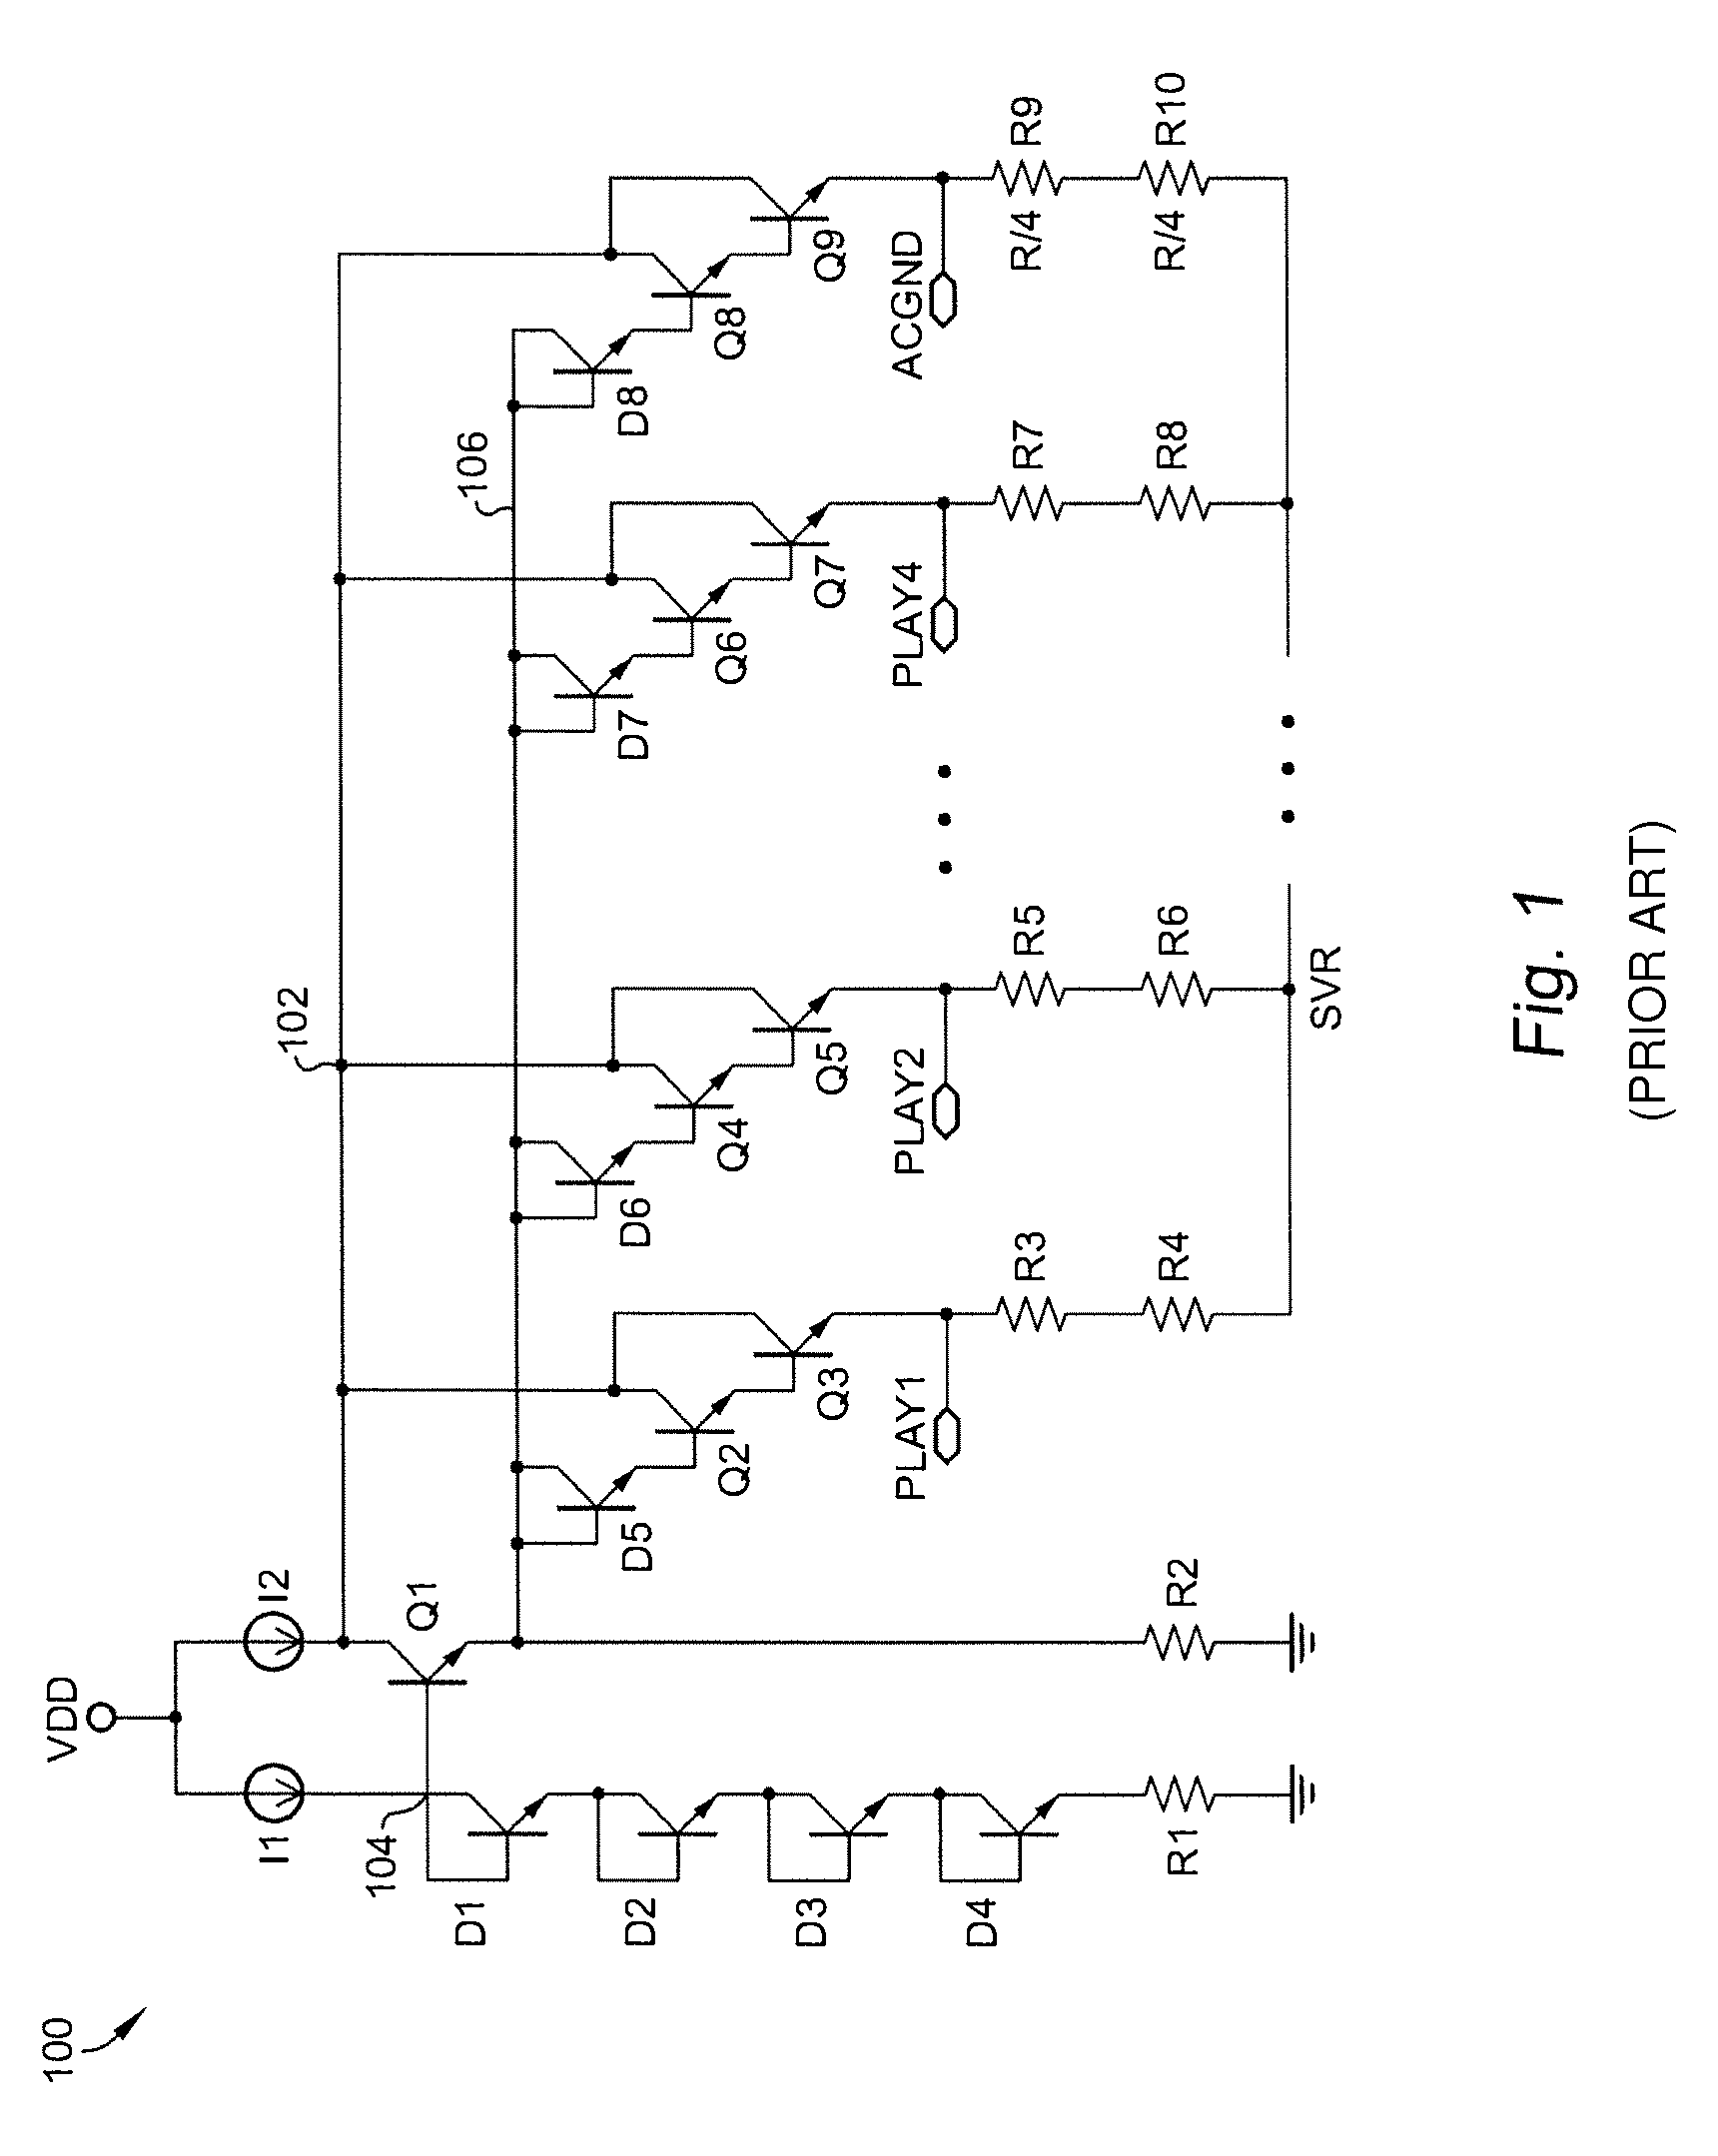 Input clamping structure for sound quality improvement in car-radio class-AB power amplifier design